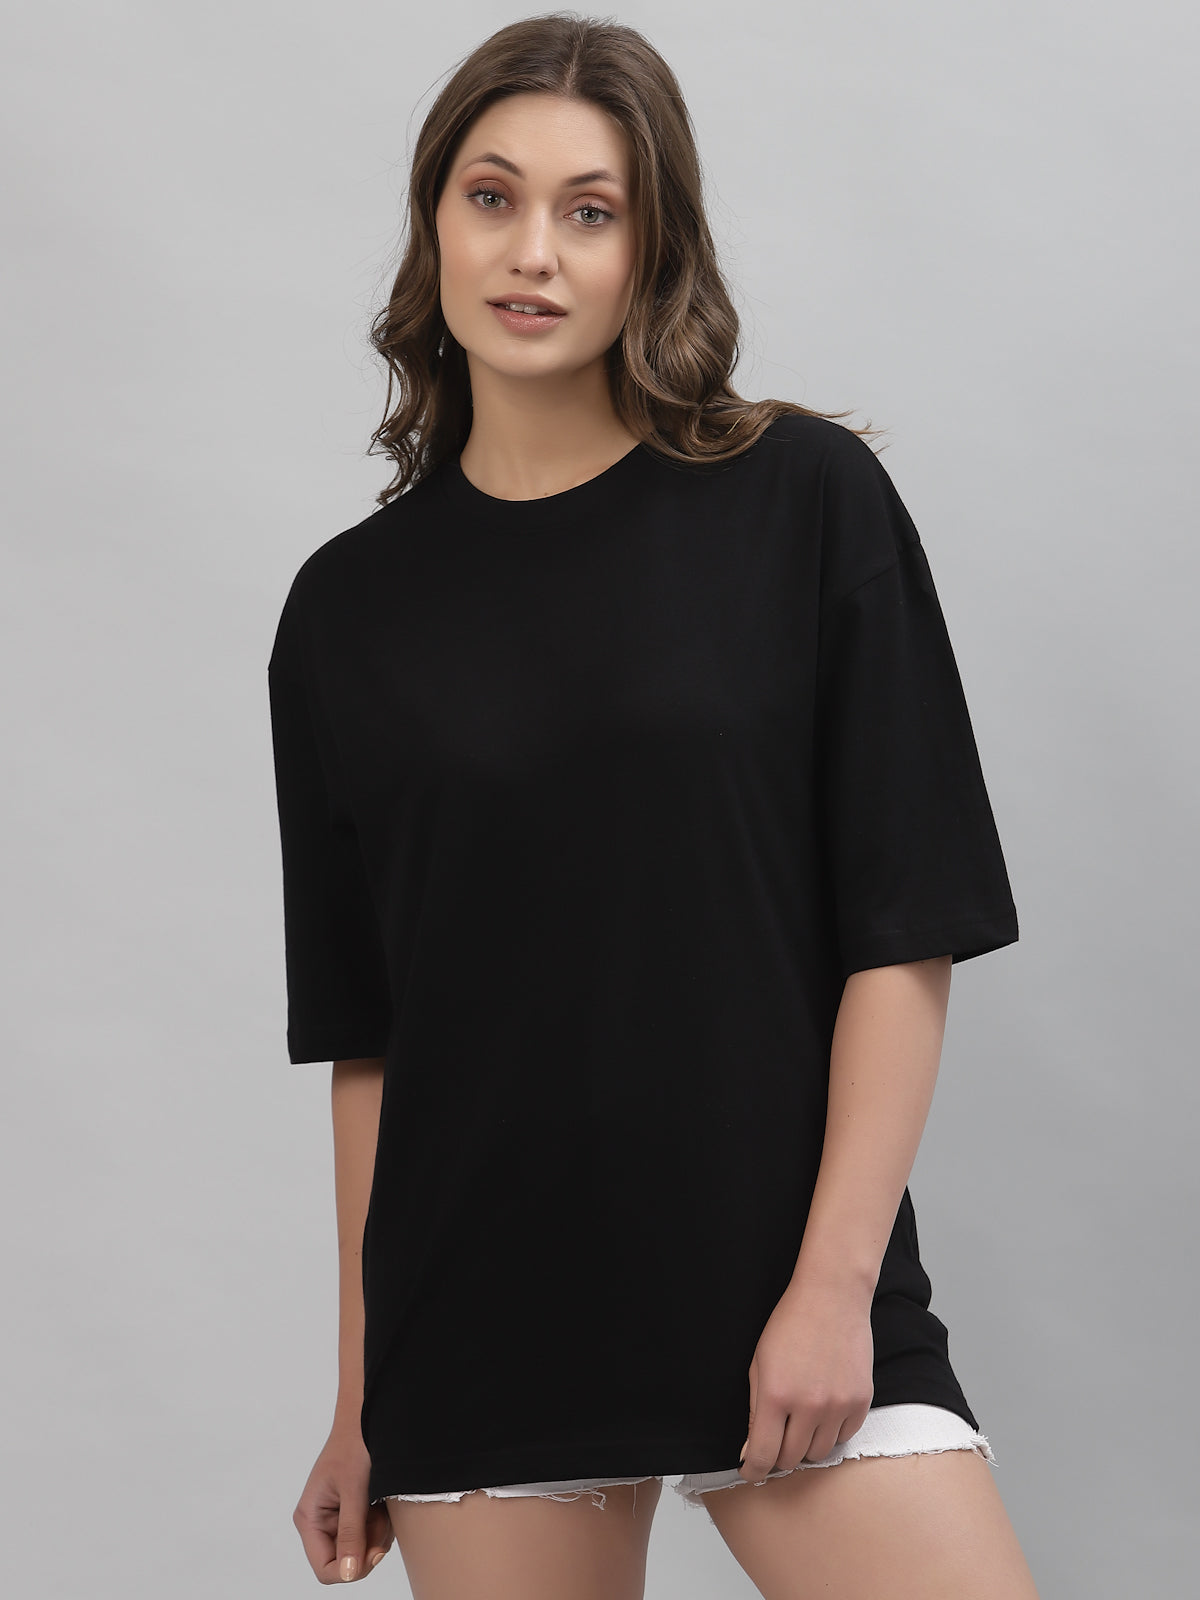 Limited Edition Black Drop-shoulder Oversized Tee for Women